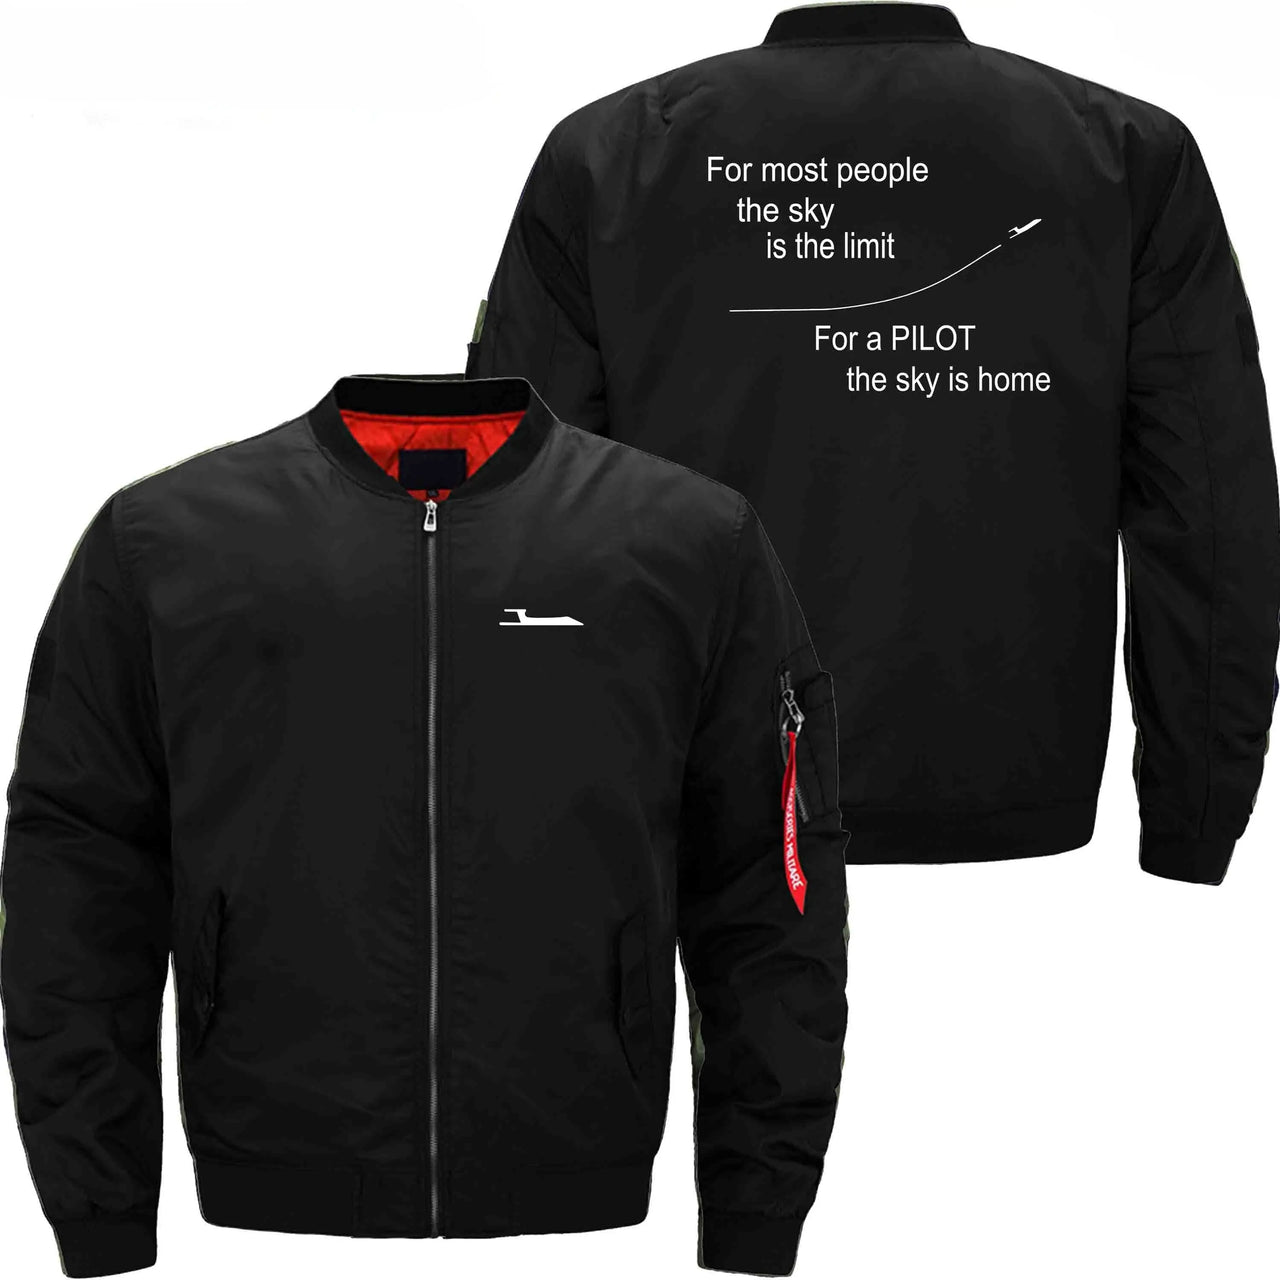 FOR MOST PEOPLE THE SKY IS THE LIMIT - JACKET THE AV8R